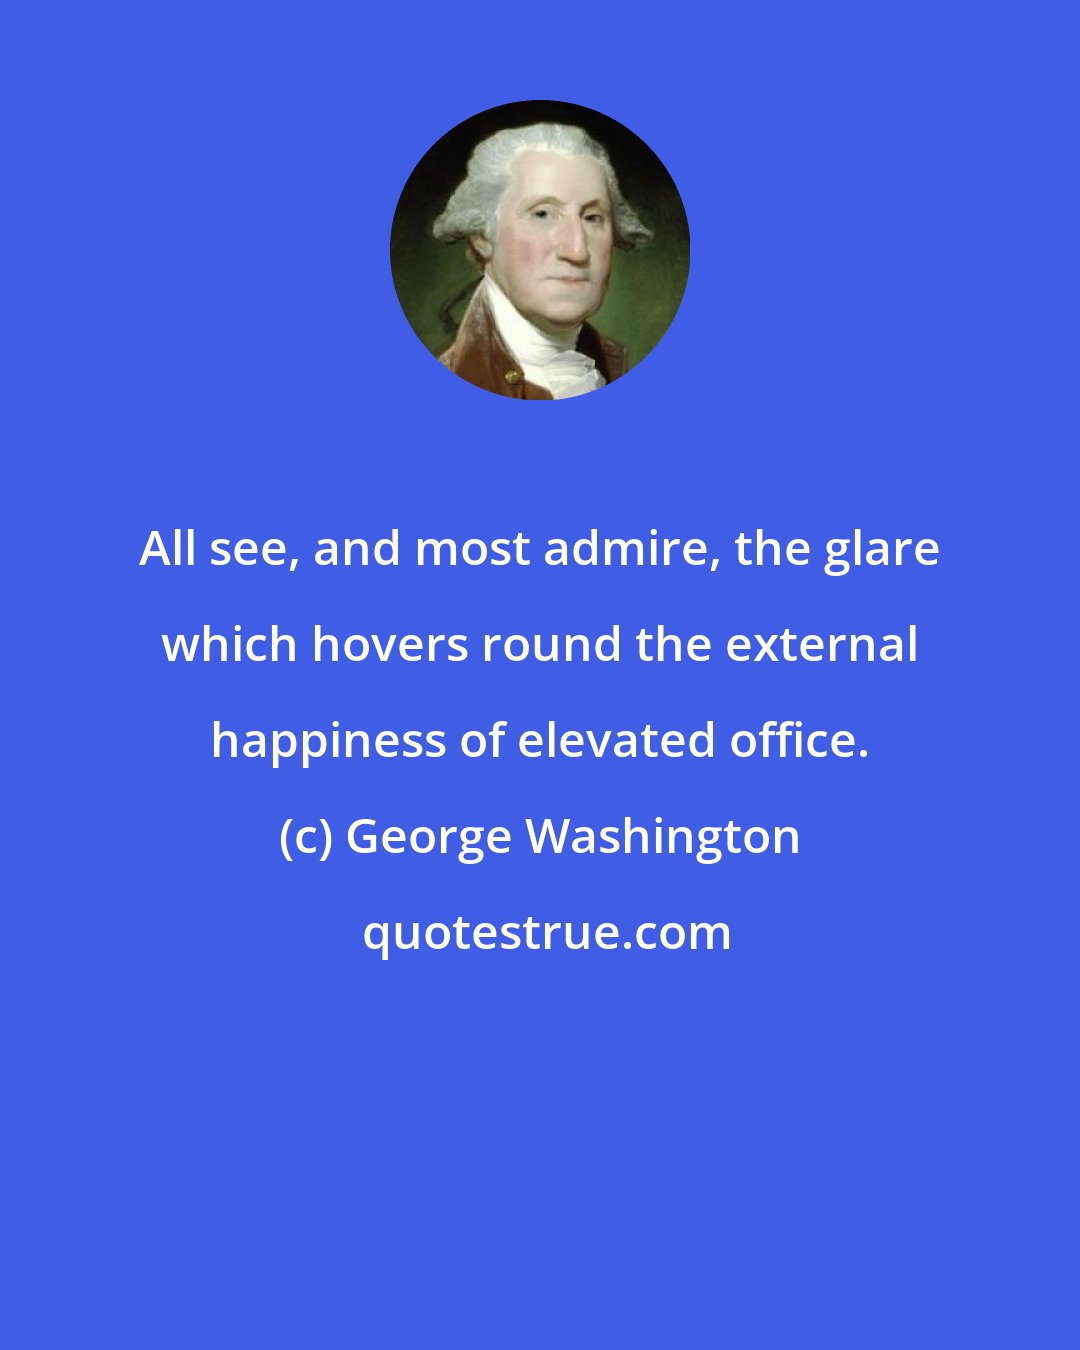 George Washington: All see, and most admire, the glare which hovers round the external happiness of elevated office.